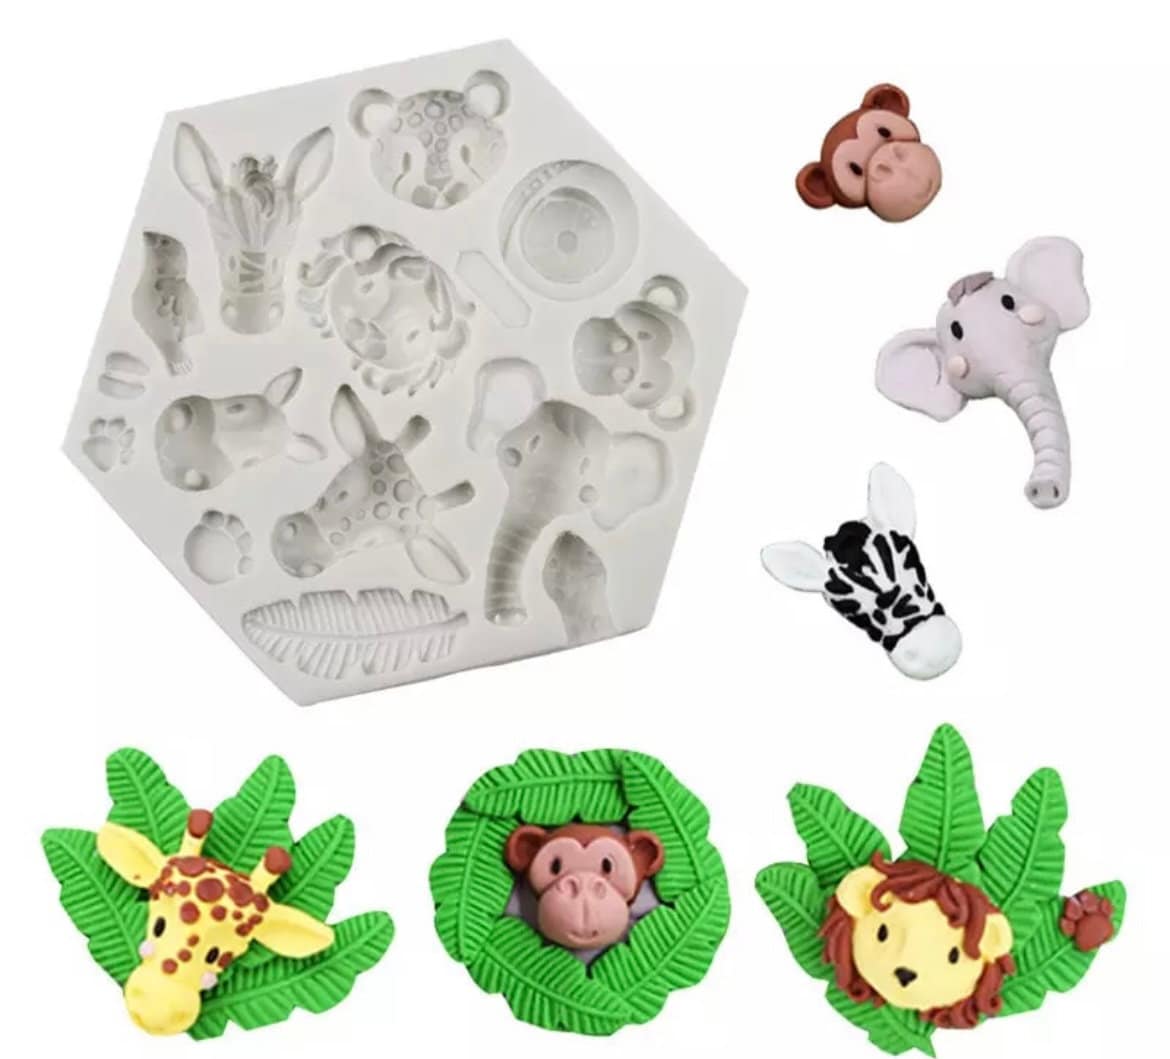 Slopehill 1pc Animals Silicone Moulds 3D Safari Animal Fondant Molds Chocolate Mold for Jungle Safari Animal Cake Cupcake Decoration Candy Cookies, Size: 2.8